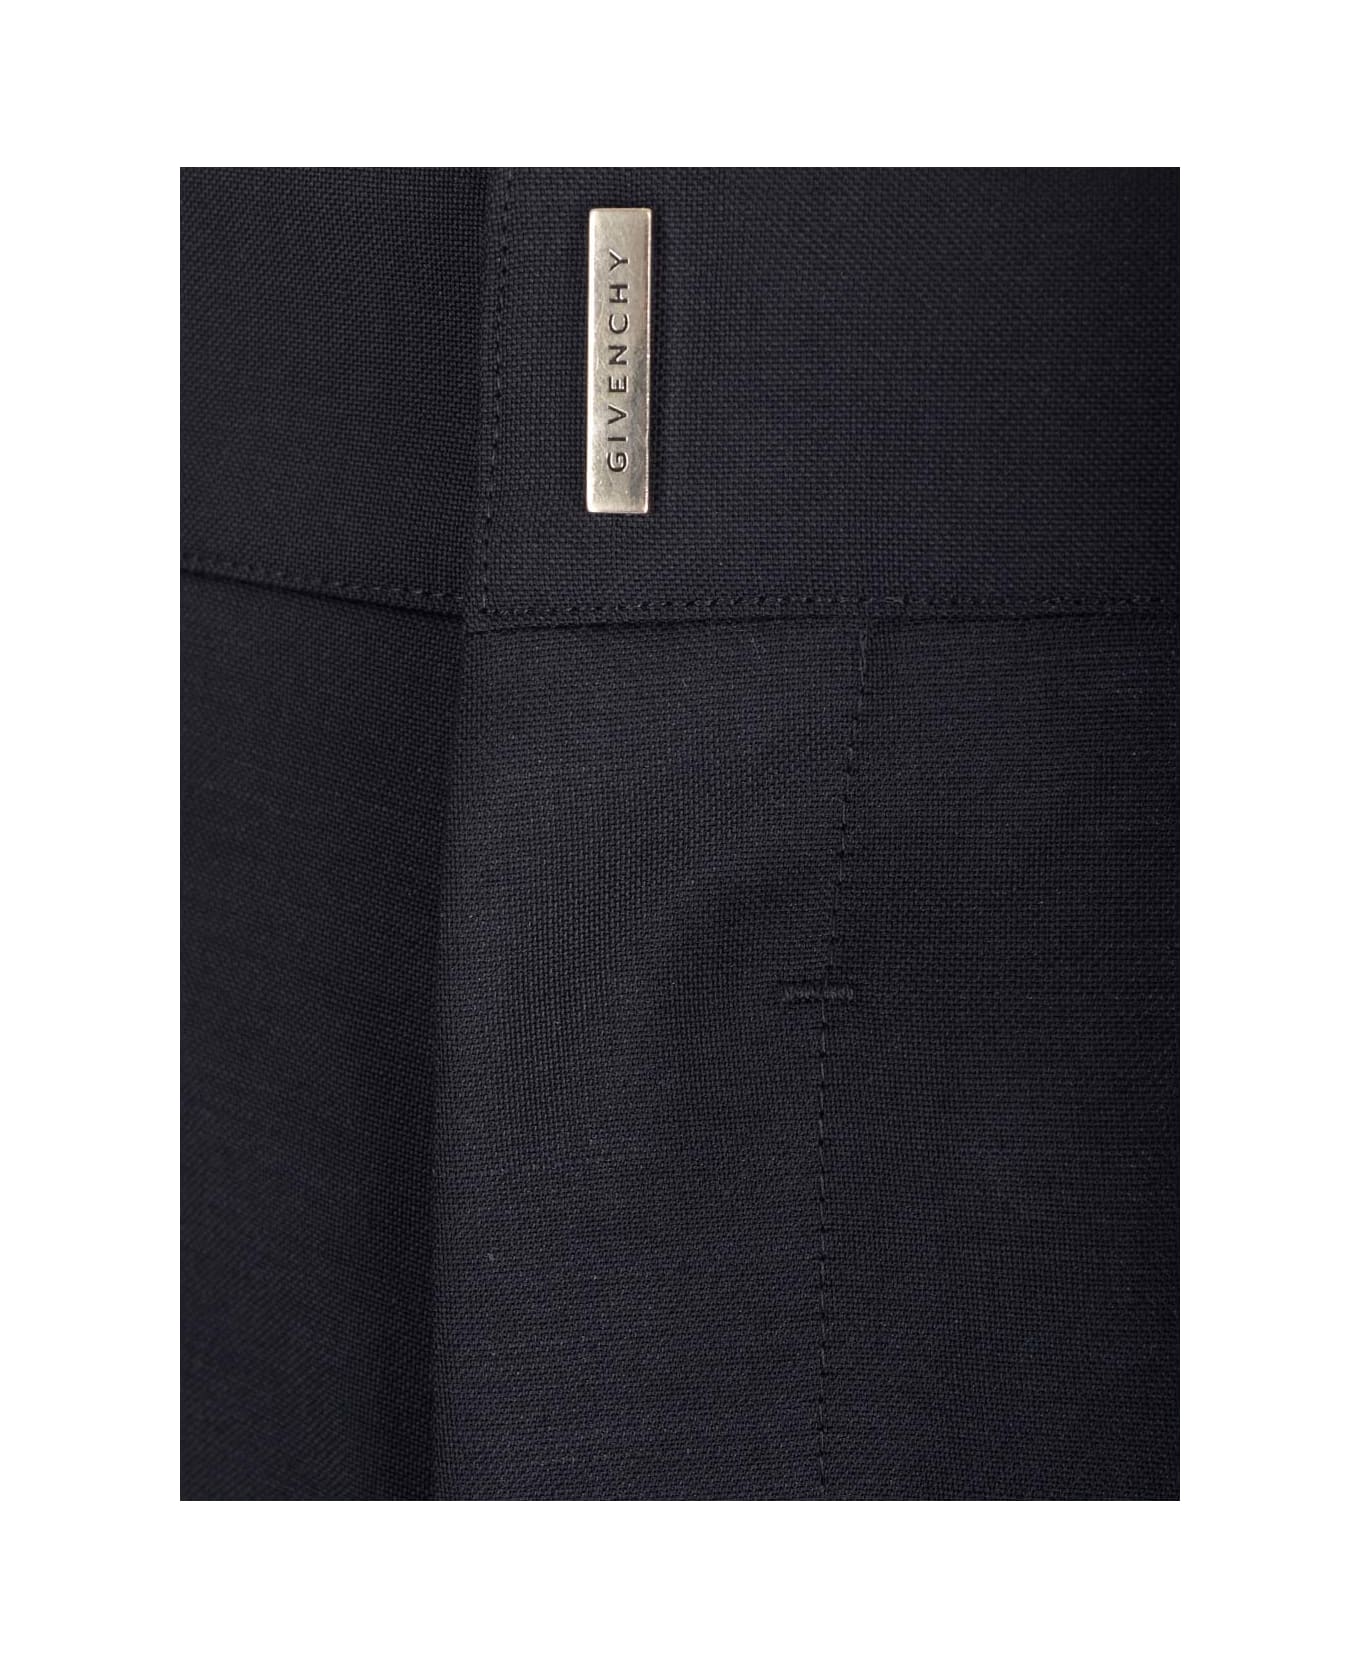 Givenchy Wool Blend Trousers - blue